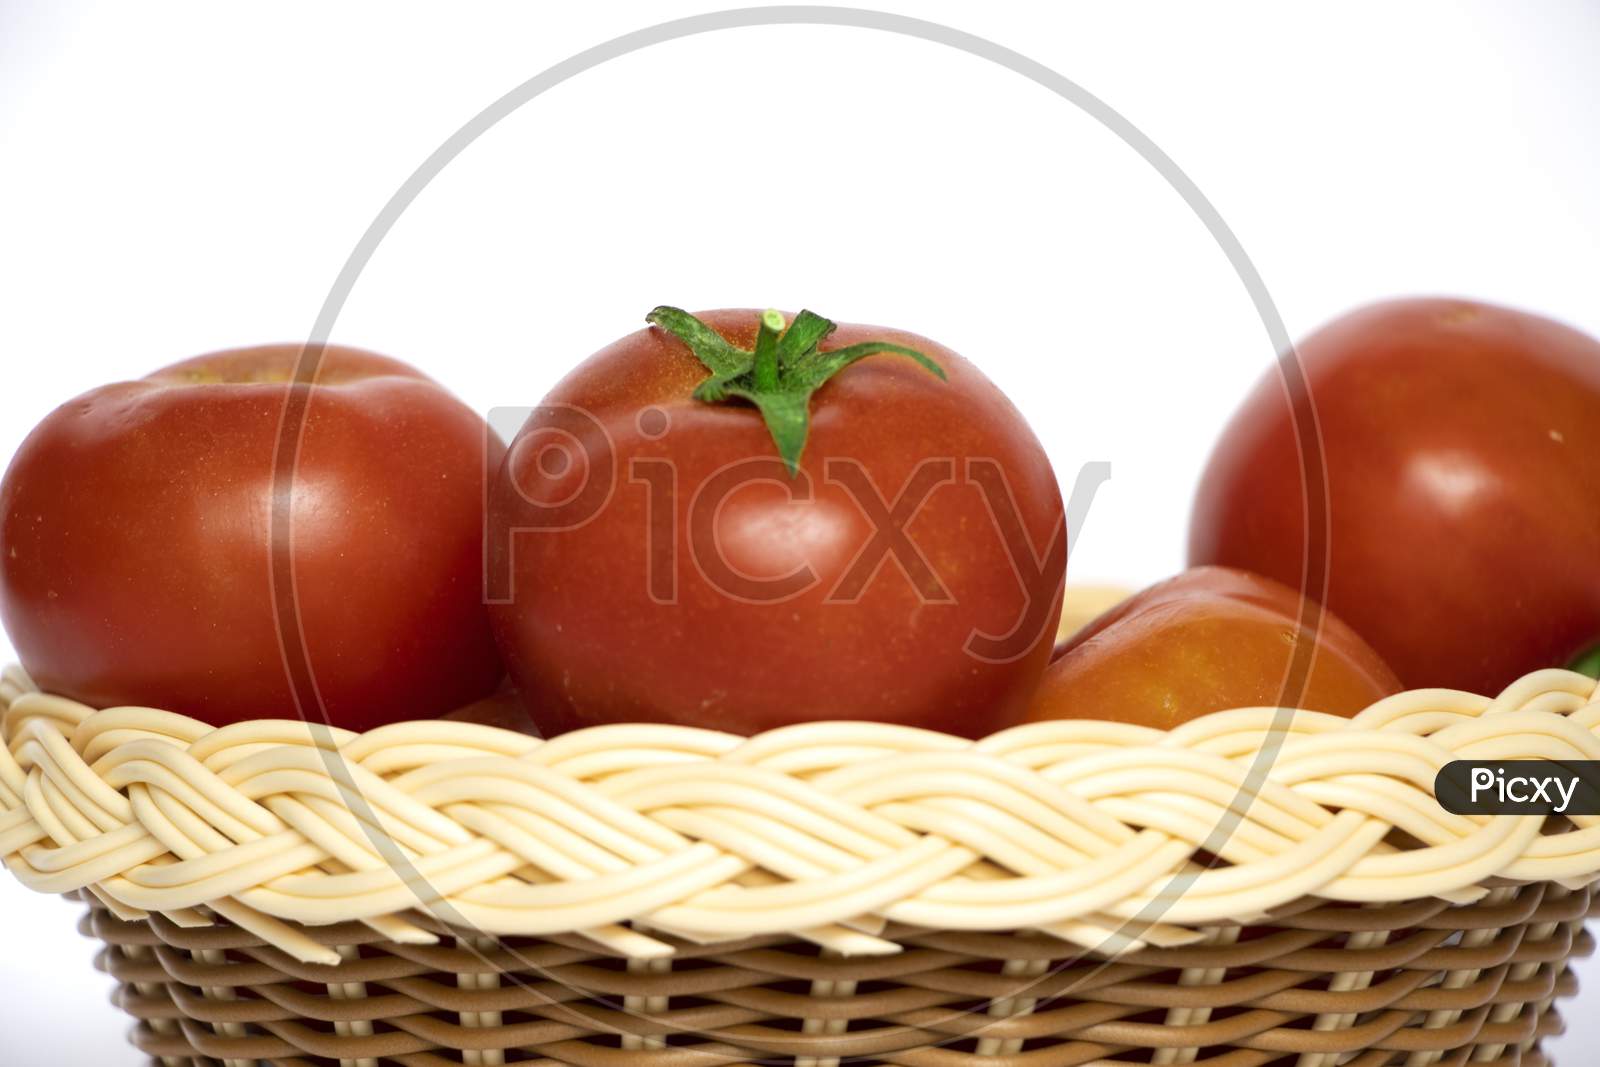 Red Tomato In Wooden Basket